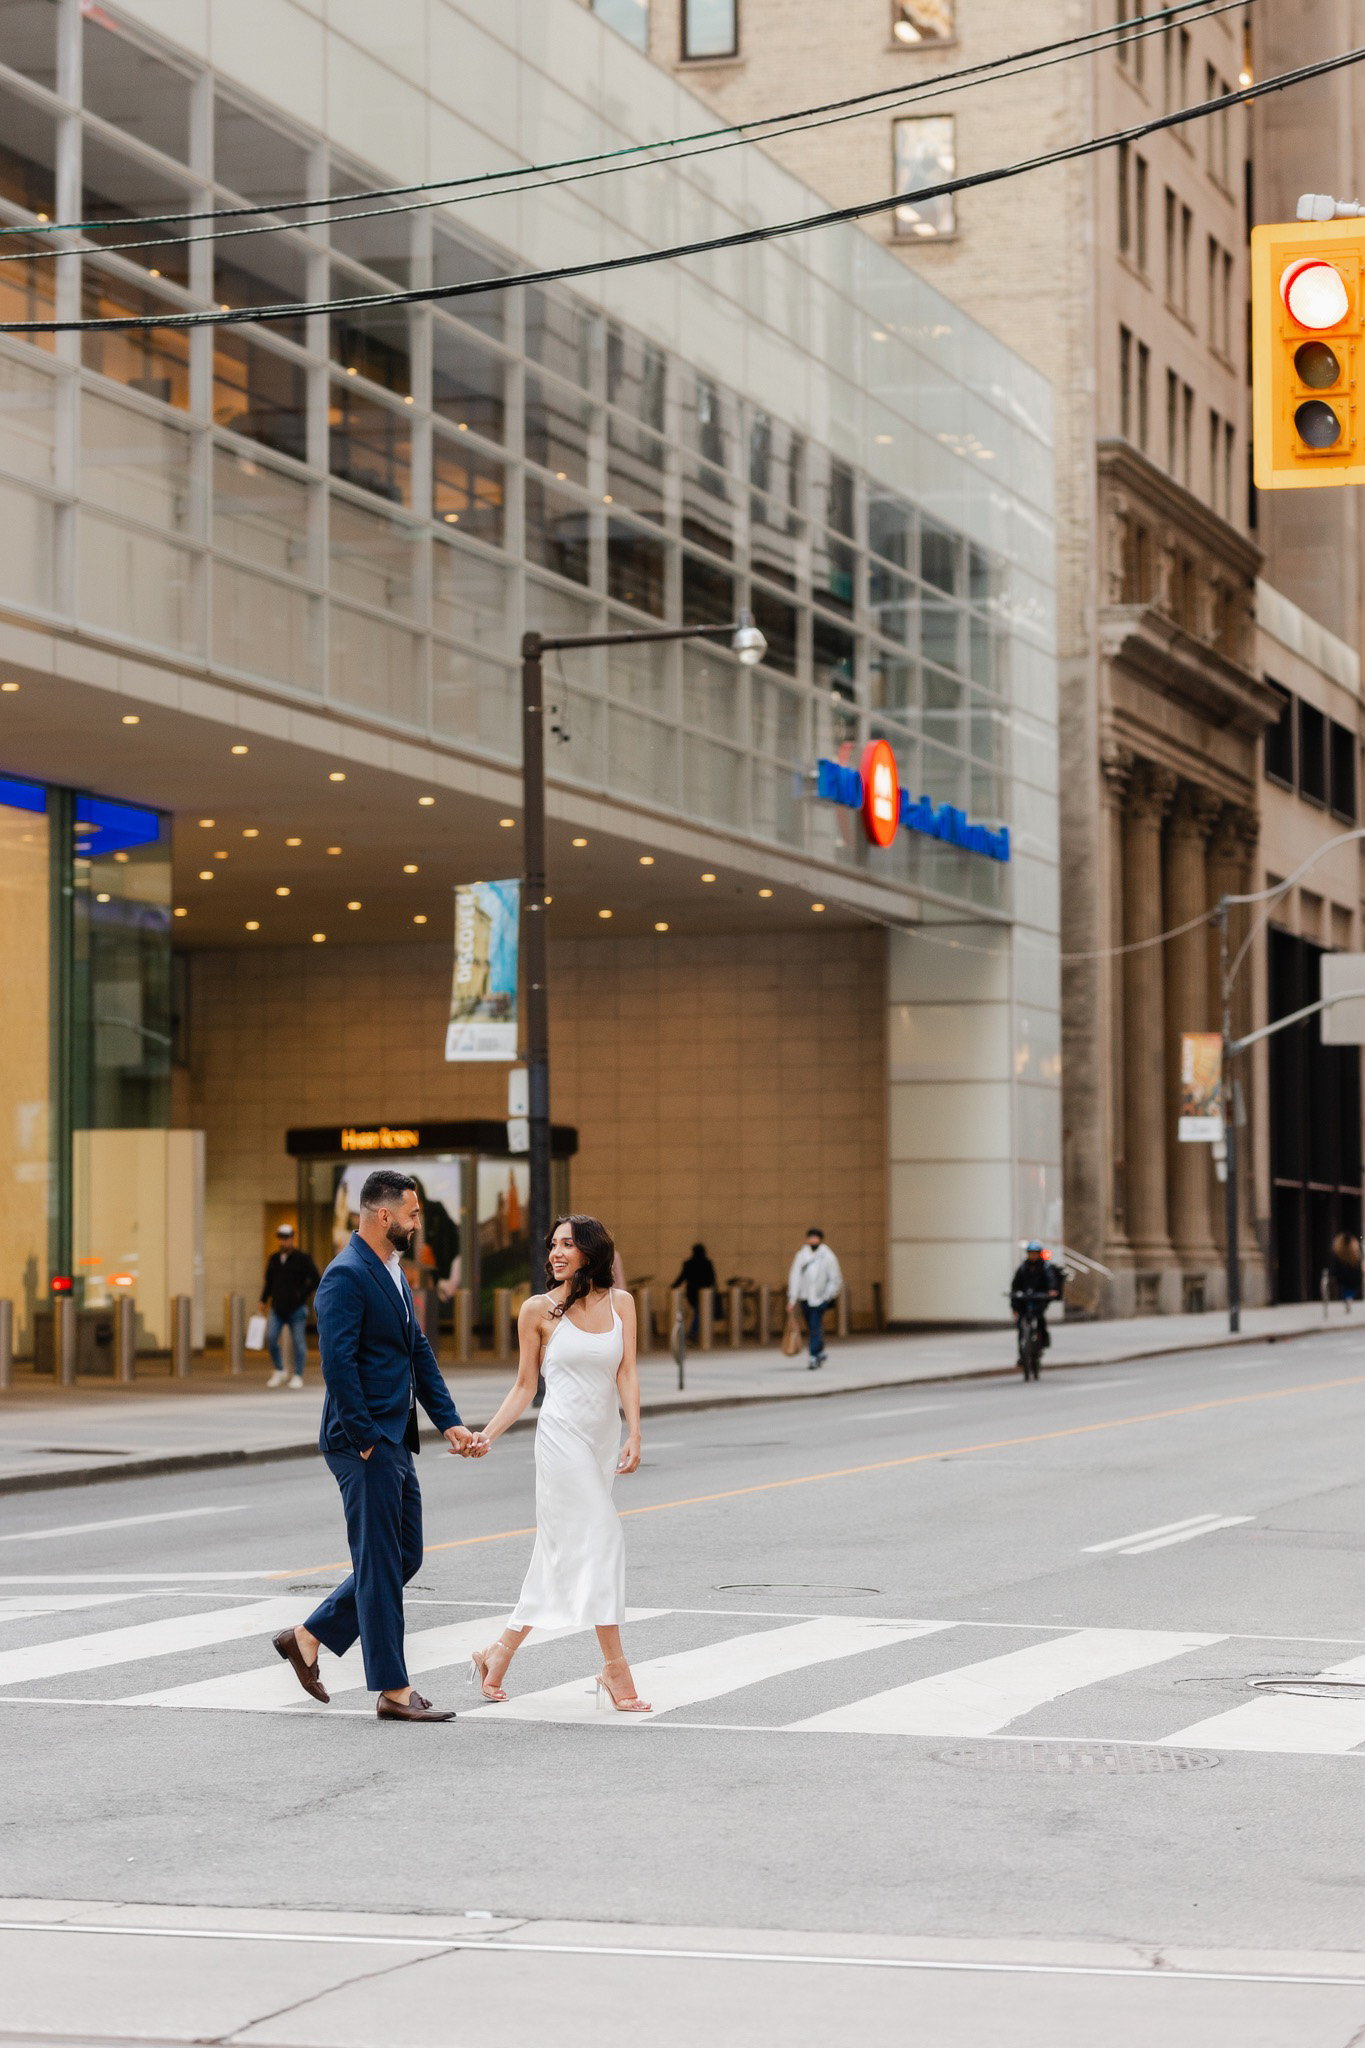 A Modern Styled Engagement Shoot In Downtown Toronto